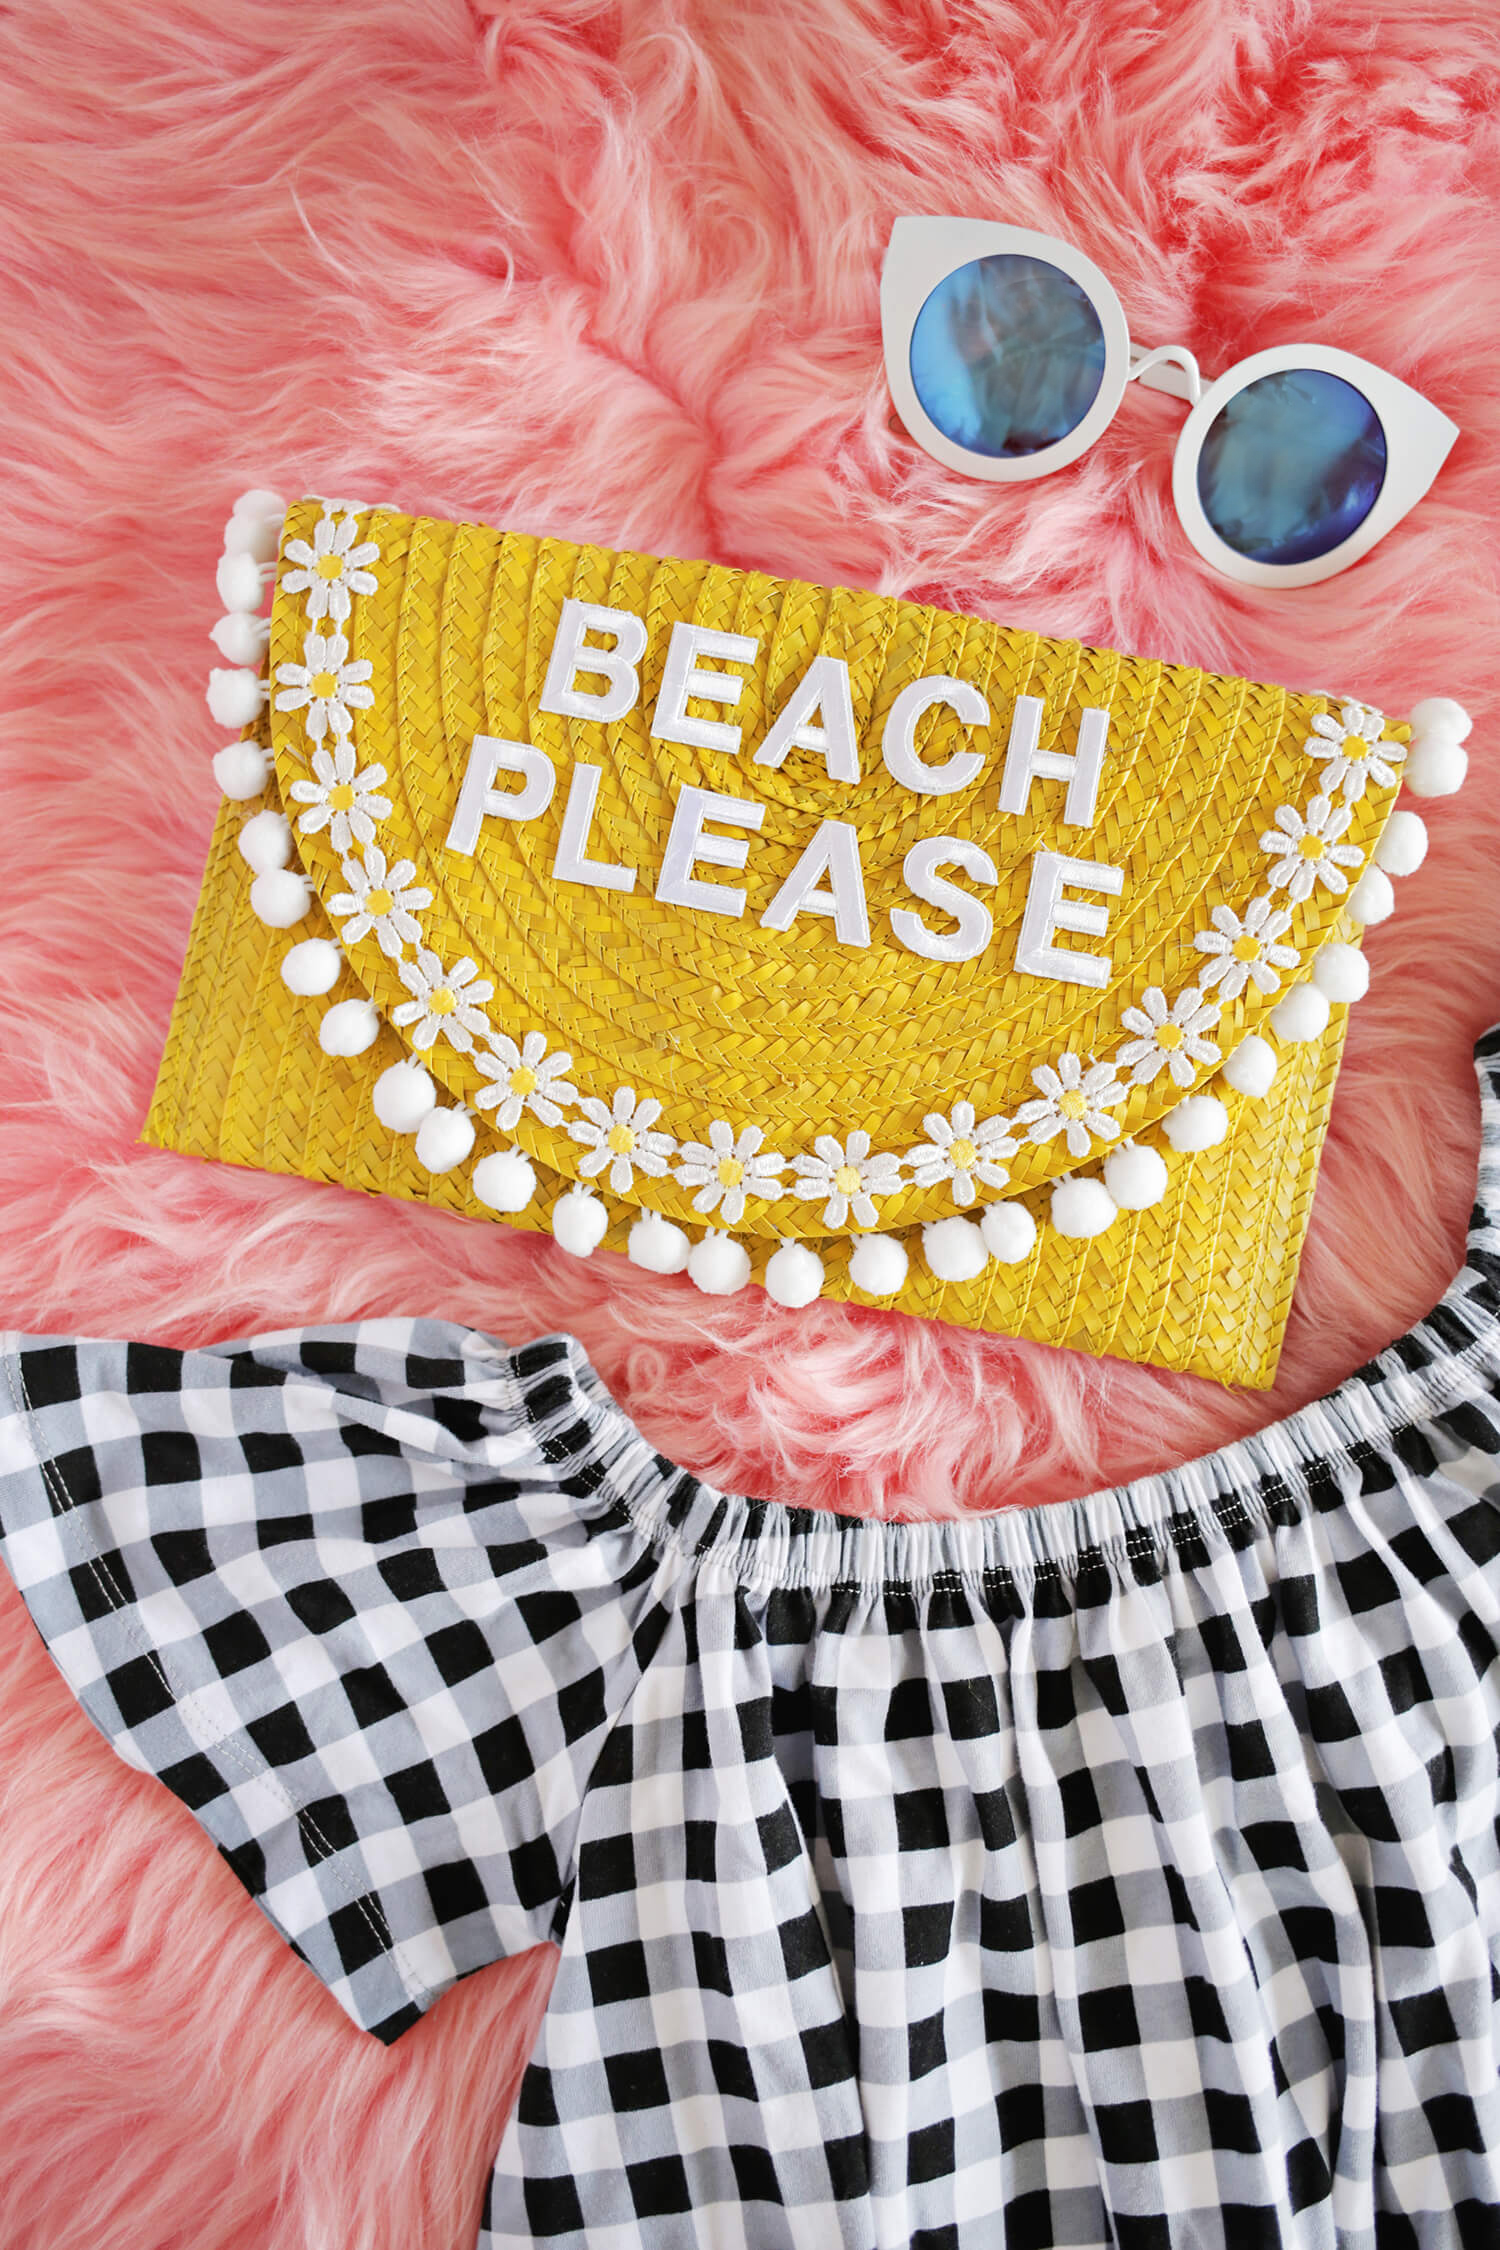 Try This! Turn a Simple Straw Clutch Into The Perfect Vacation Bag! (click through for tutorial 